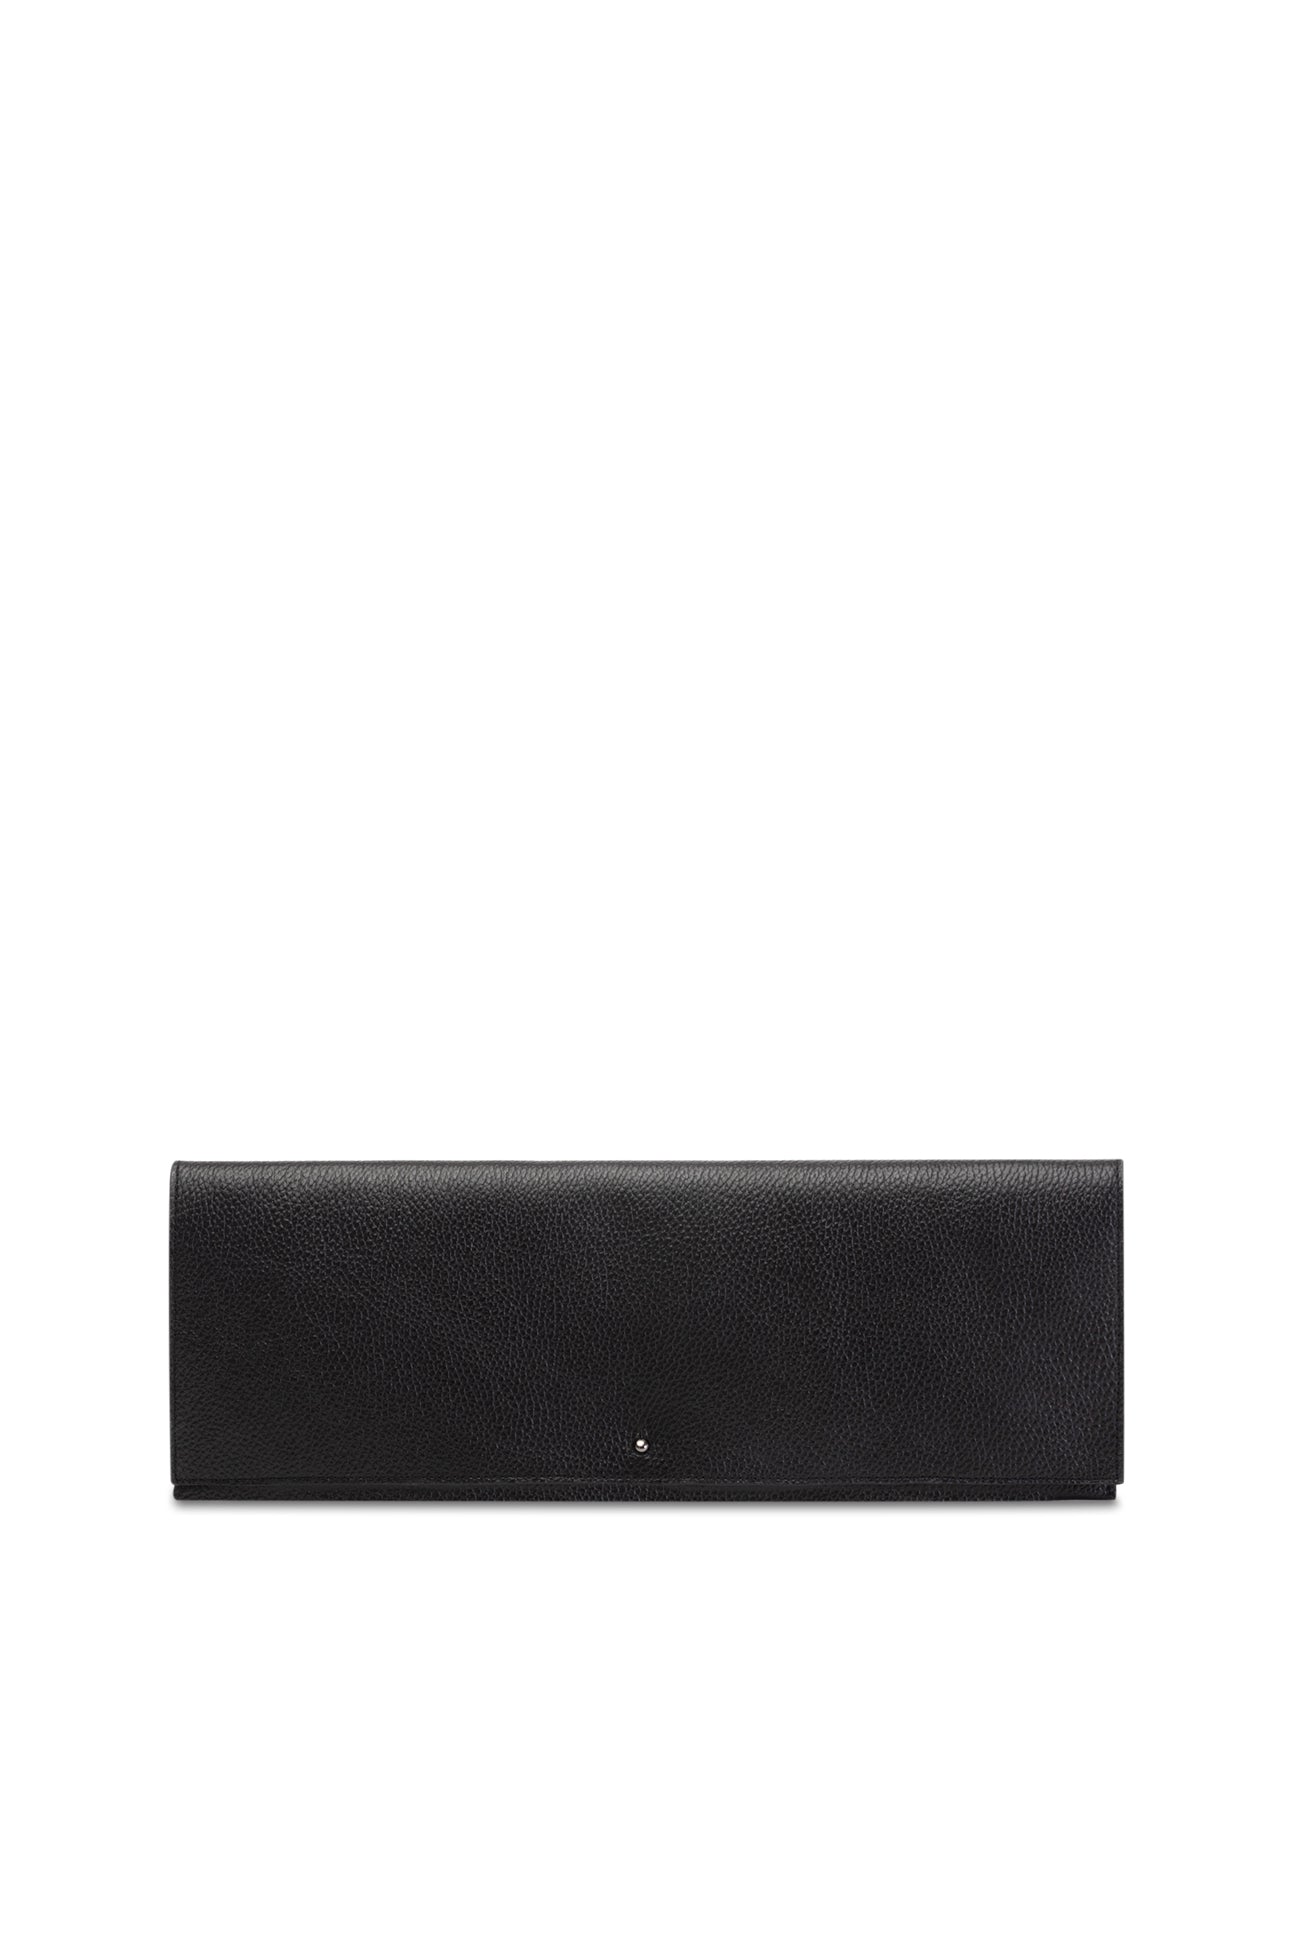 White Leather Cocktail Purse - Belle Leather Clutch | Marcella